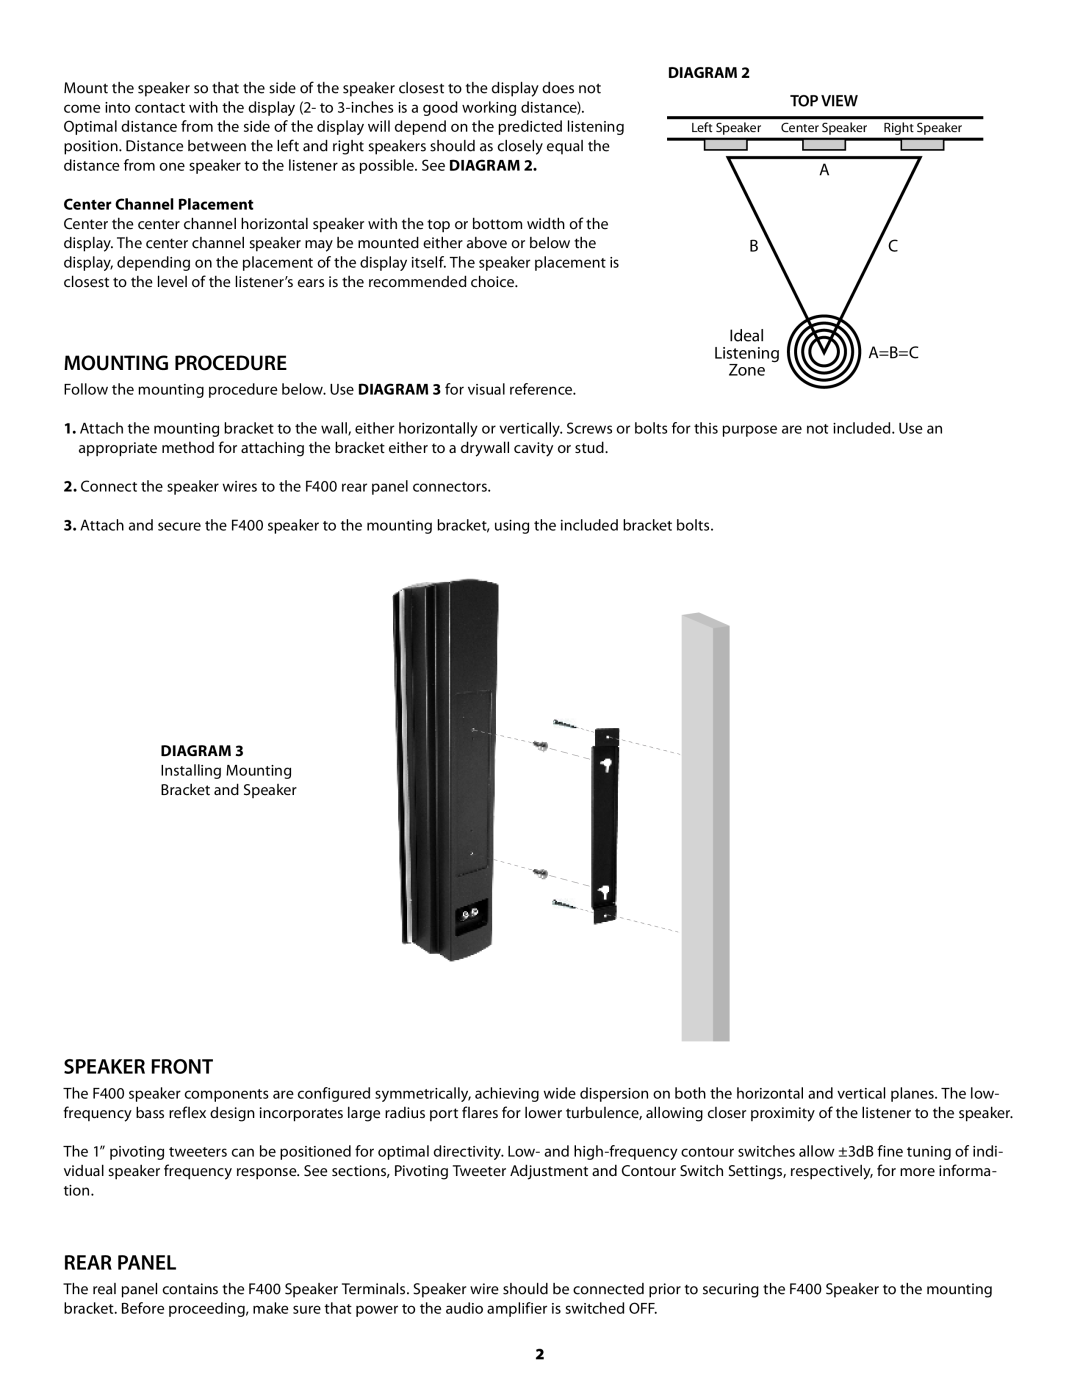 Proficient Audio Systems F400BLK Mounting Procedure, Speaker Front, Rear Panel, Center Channel Placement, Diagram Top View 